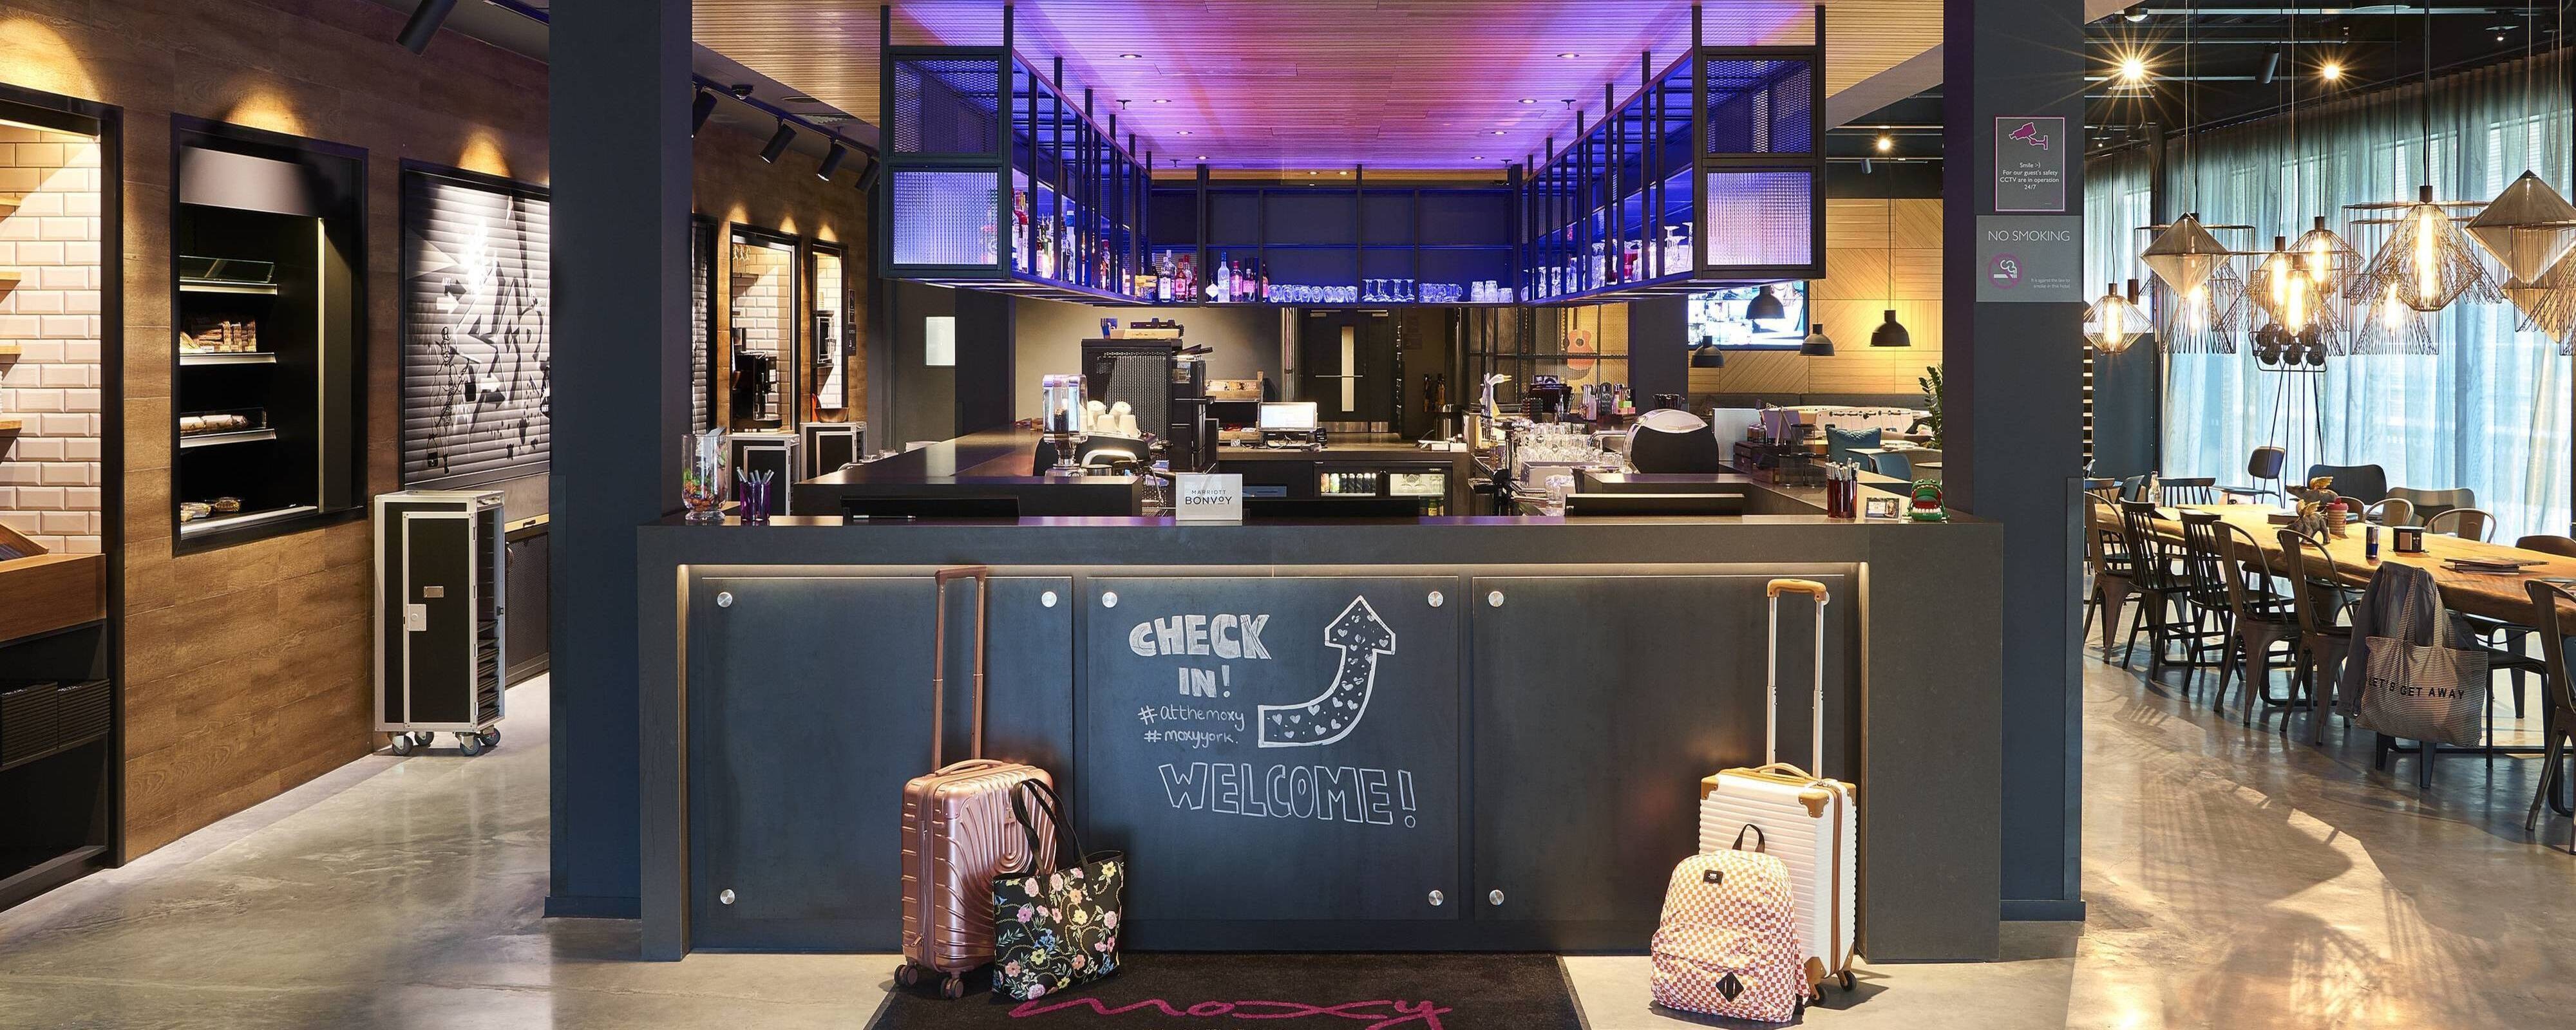 Image for Moxy York, a Marriott hotel.